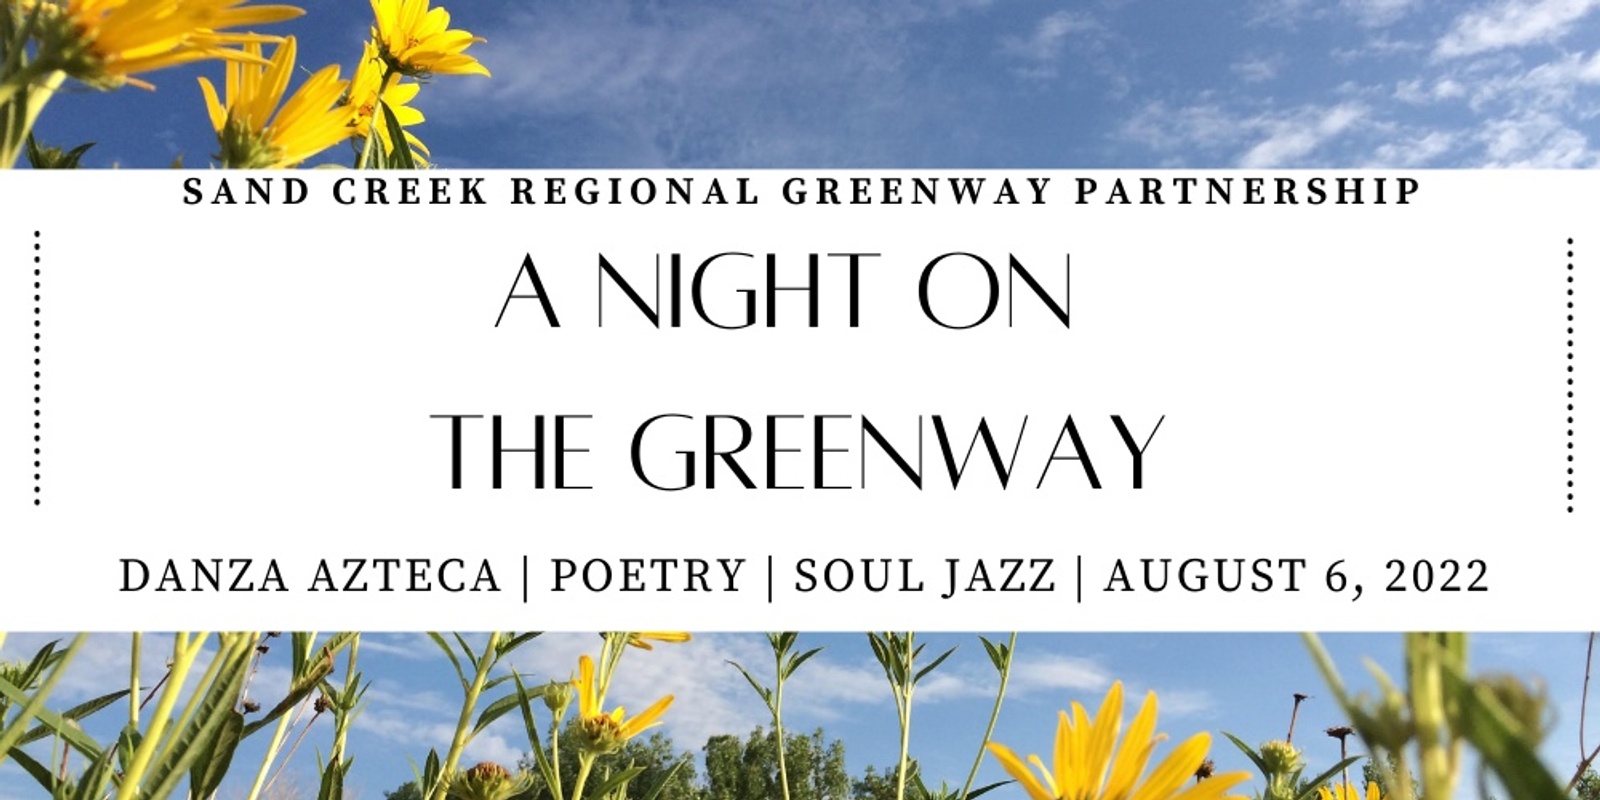 A Night on the Greenway